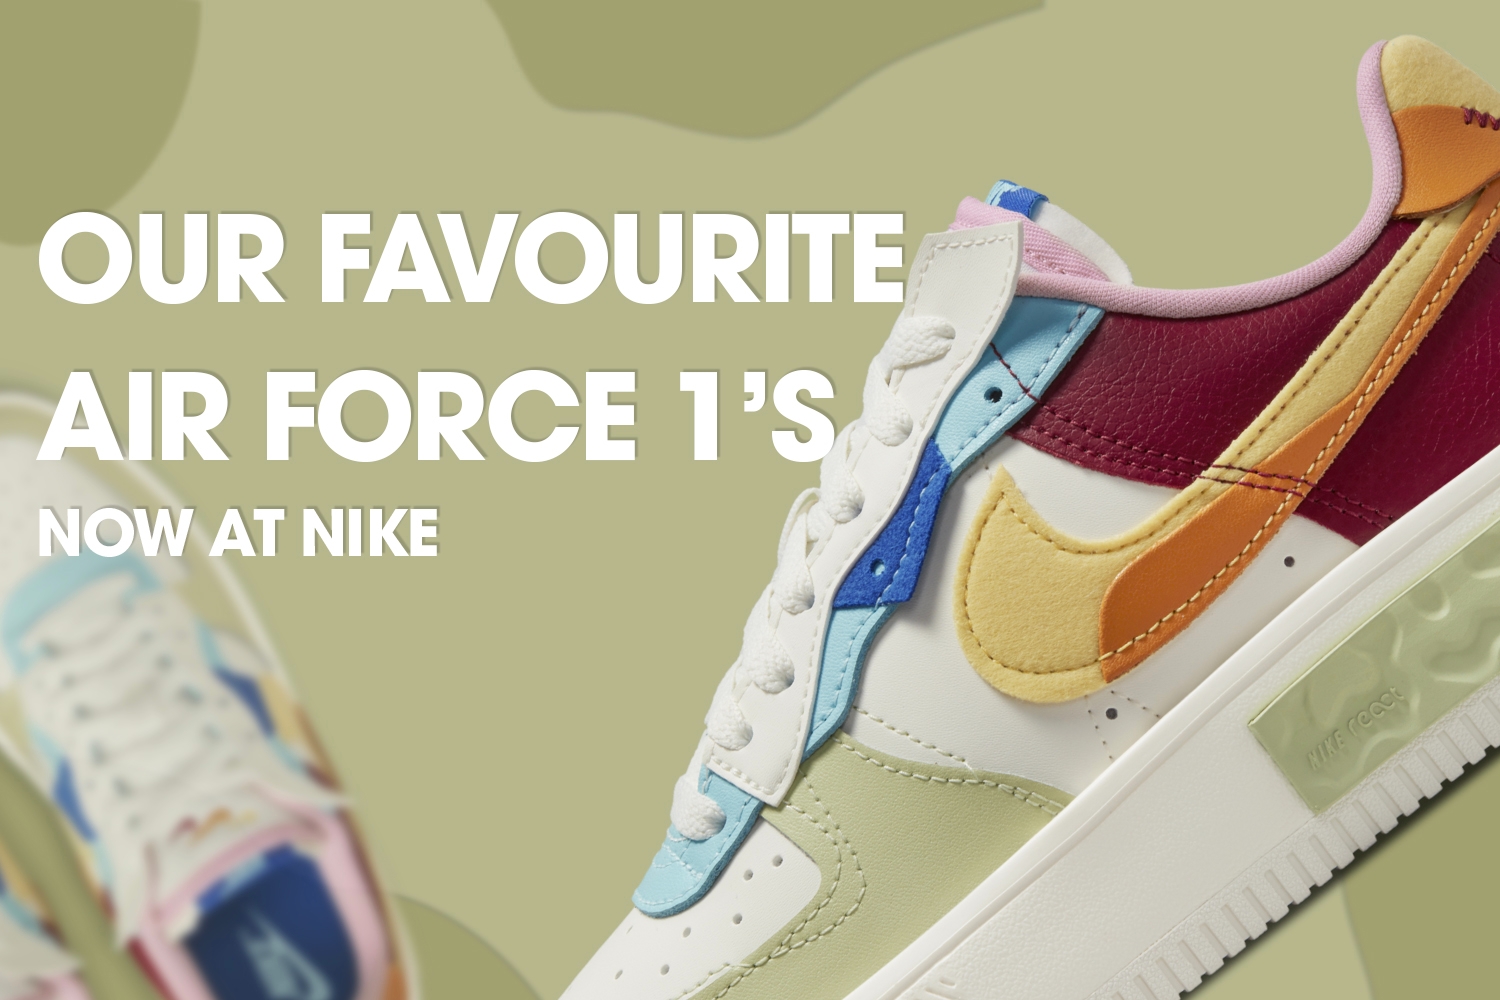 Our favourite Air Force 1s now at Nike